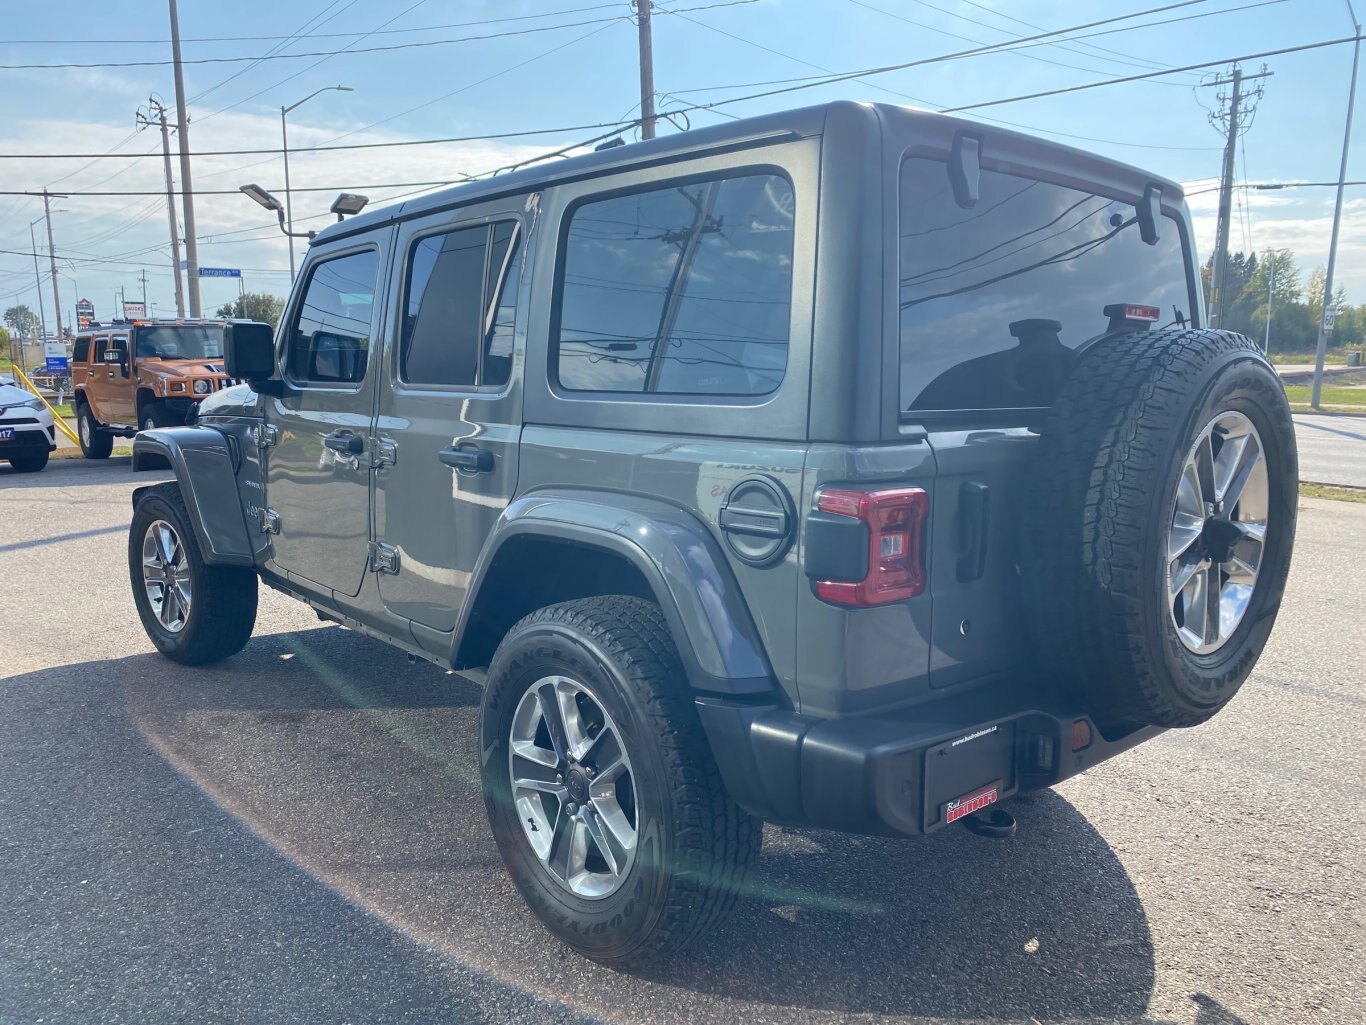 2020 JEEP WRANGLER UNLIMITED SAHARA 4X4 WITH LEATHER SEATS, HEATED SEATS, HEATED STEERING WHEEL, REAR VIEW CAMERA, REMOTE START AND NAVIGATION!!